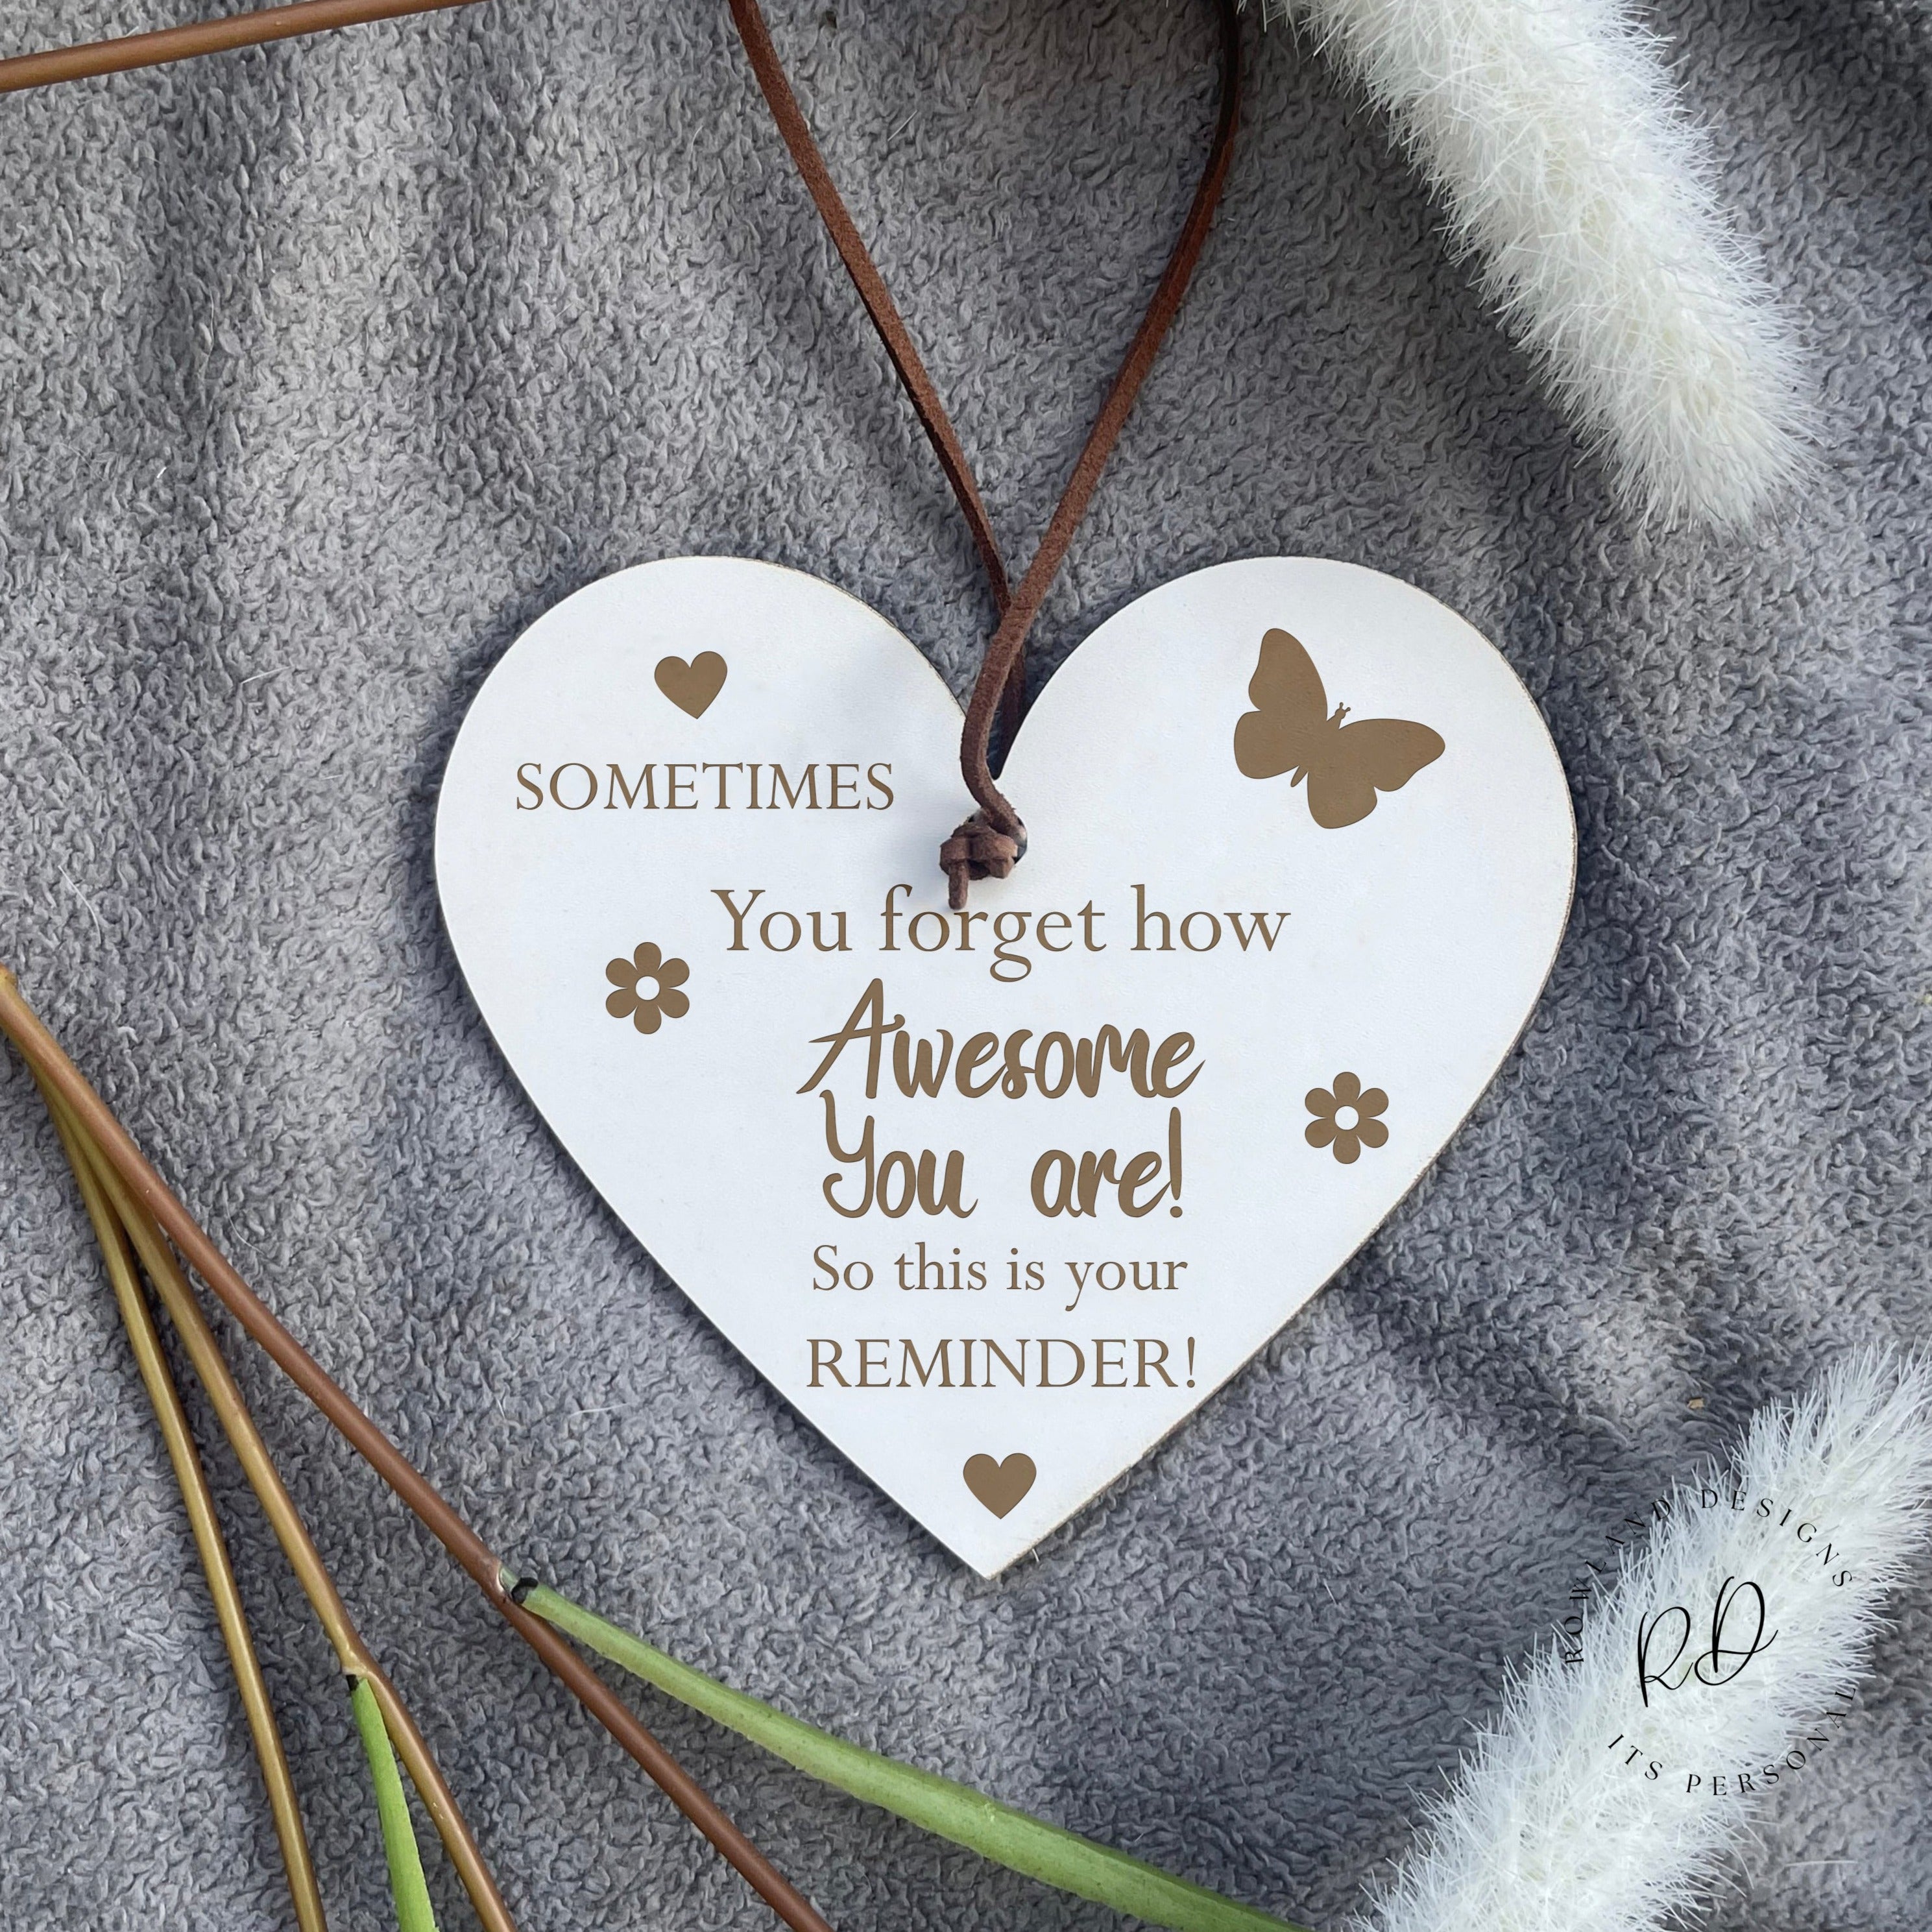 Awesome You Laser Engraved Heart Plaque with the message 'Sometimes you forget how awesome you are, so this is your reminder,' perfect keepsake gift.